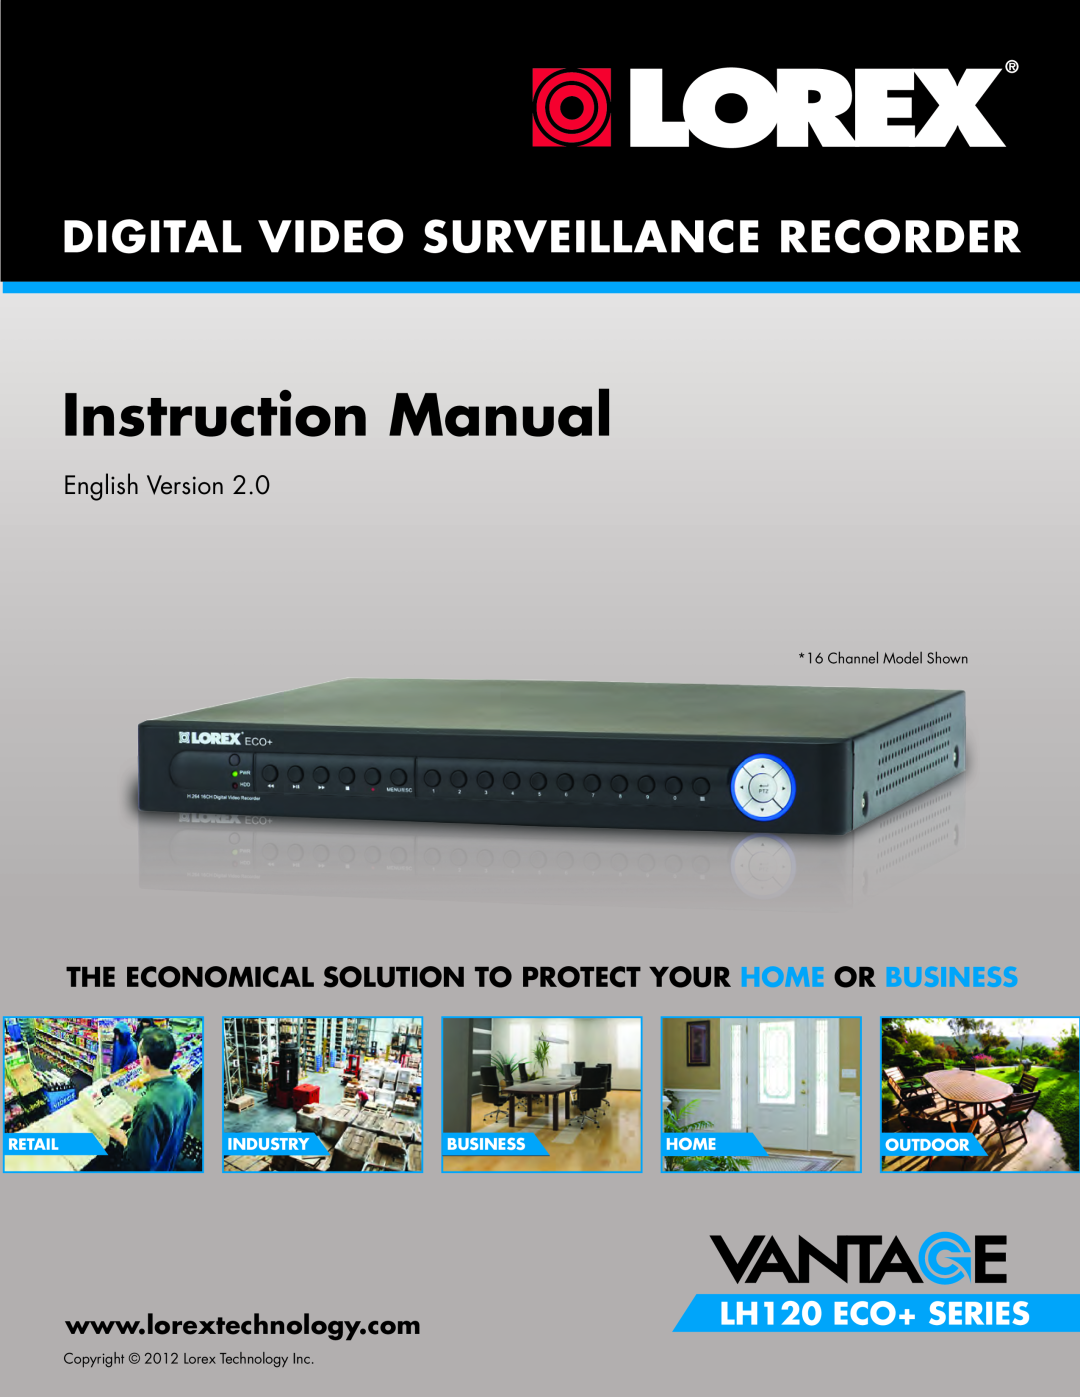 Lorex 16 channel security dvr with 500GB hard drive, remote viewing manual English Version, LH120 ECO+ SERIES, Industry 